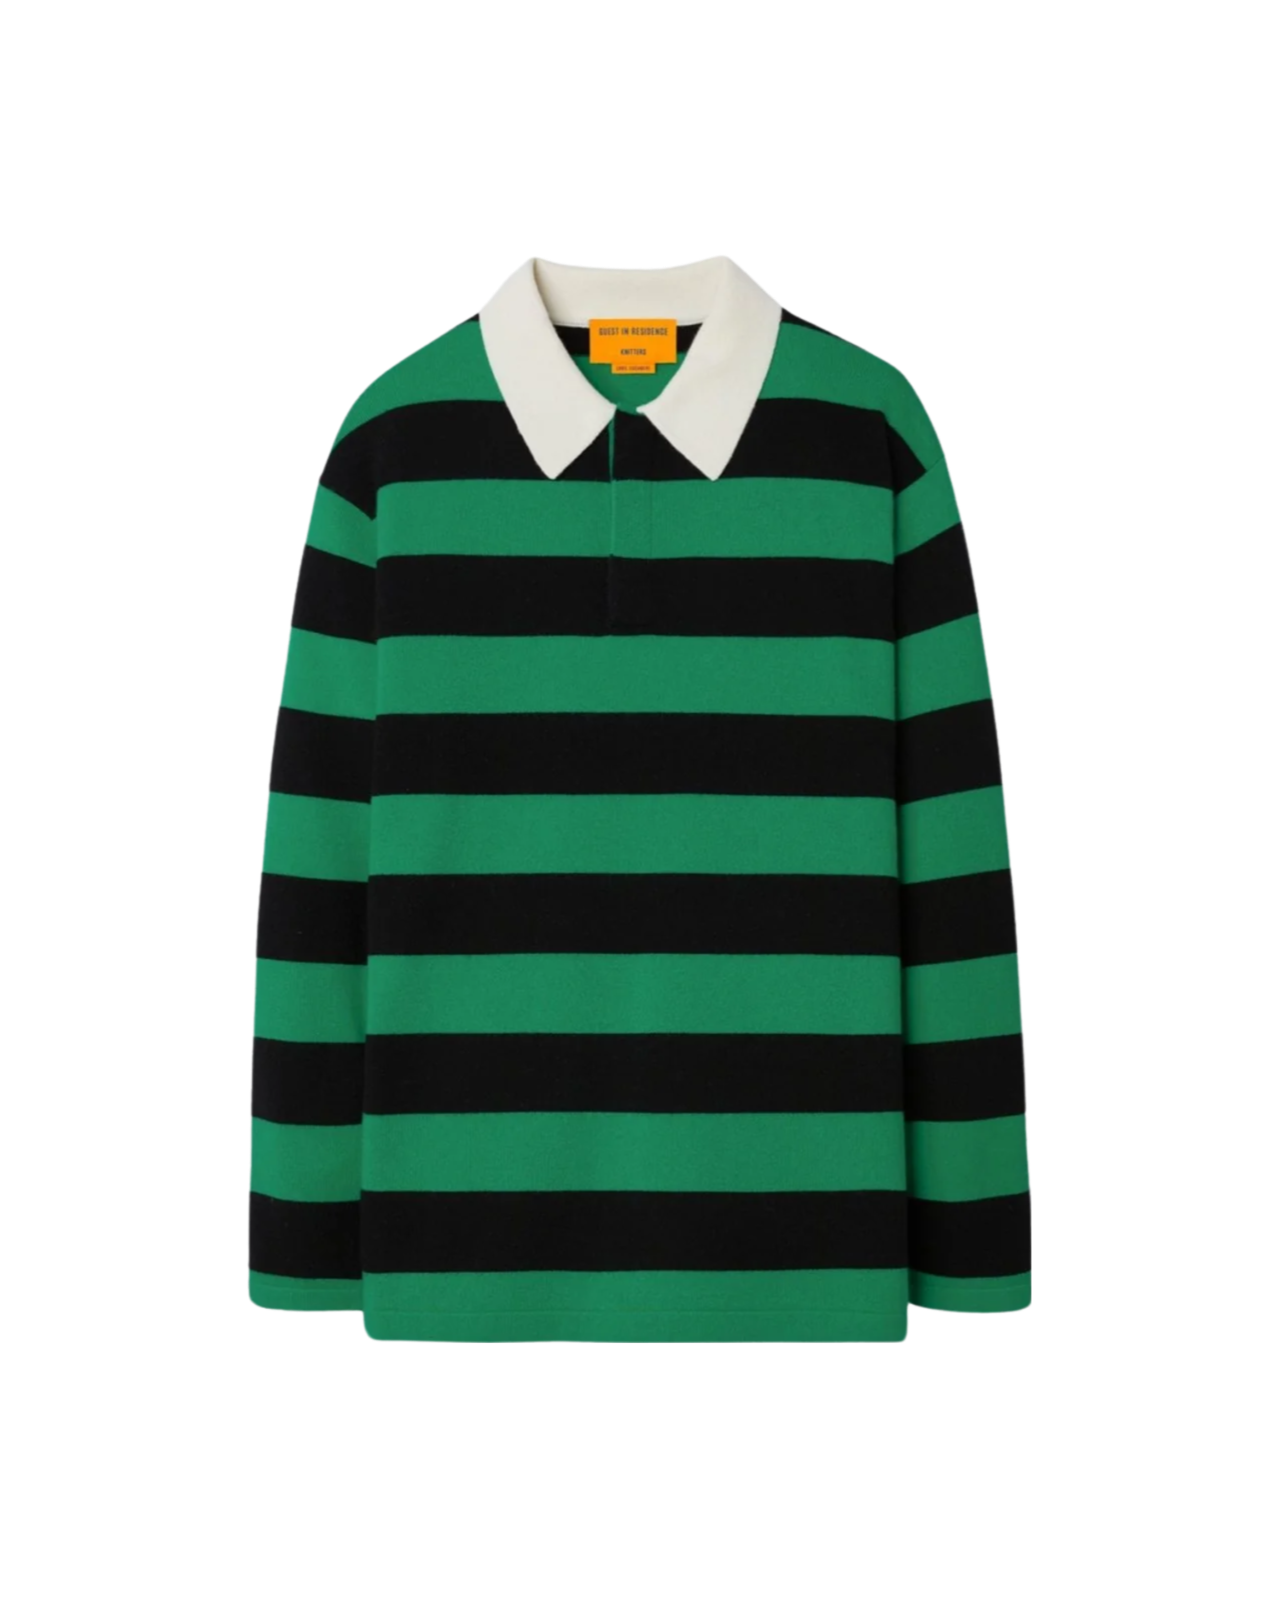 Striped Rugby